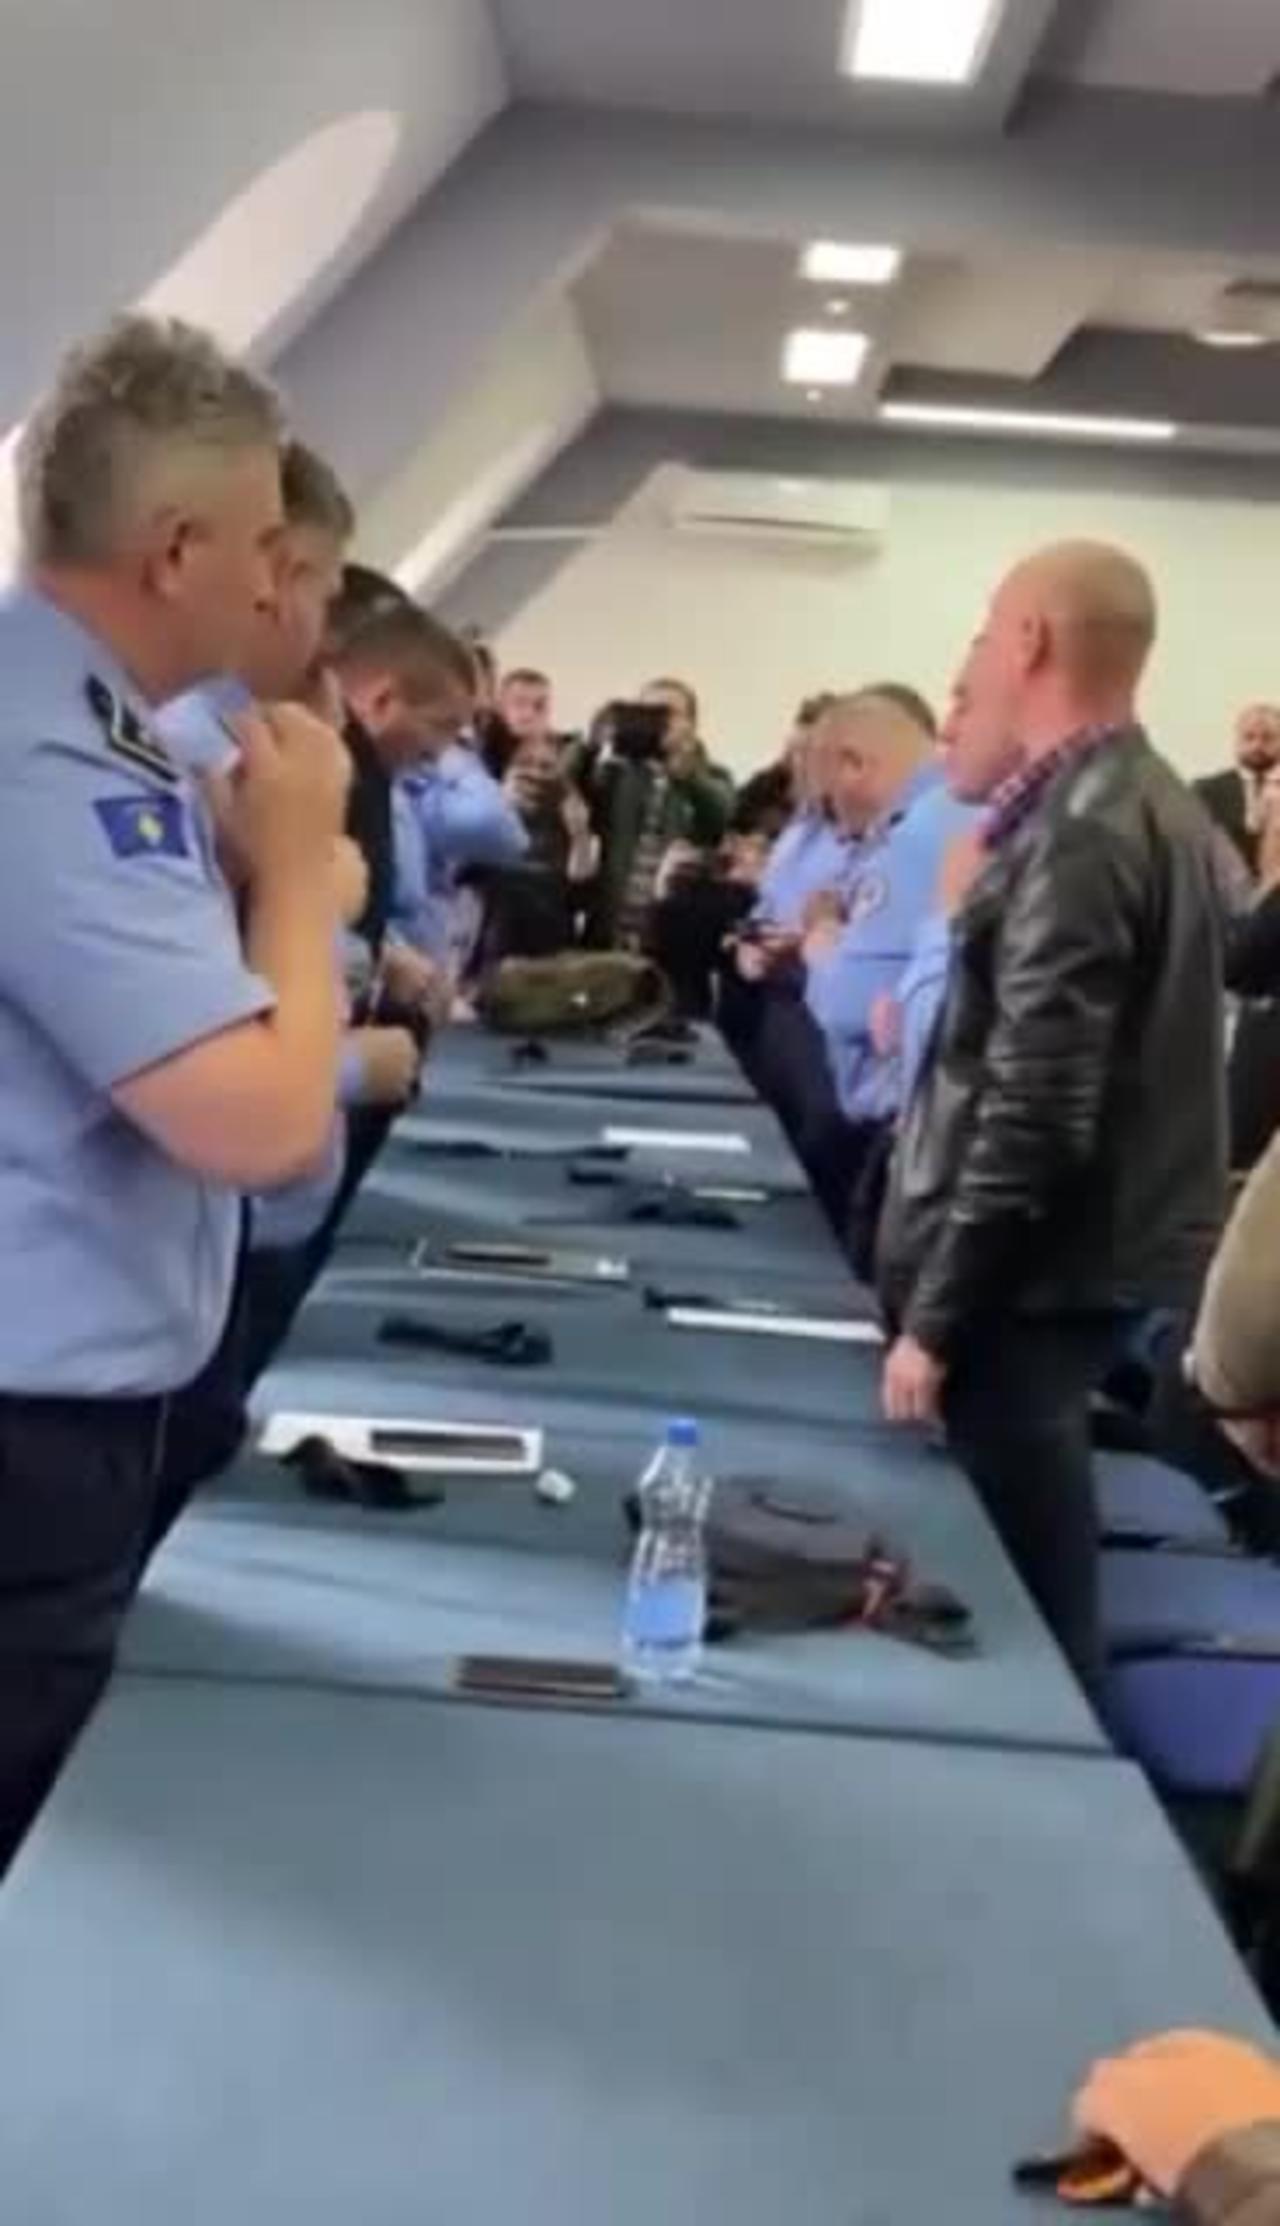 Serb police Province of Kosovo and Metohija take off their uniforms in protest